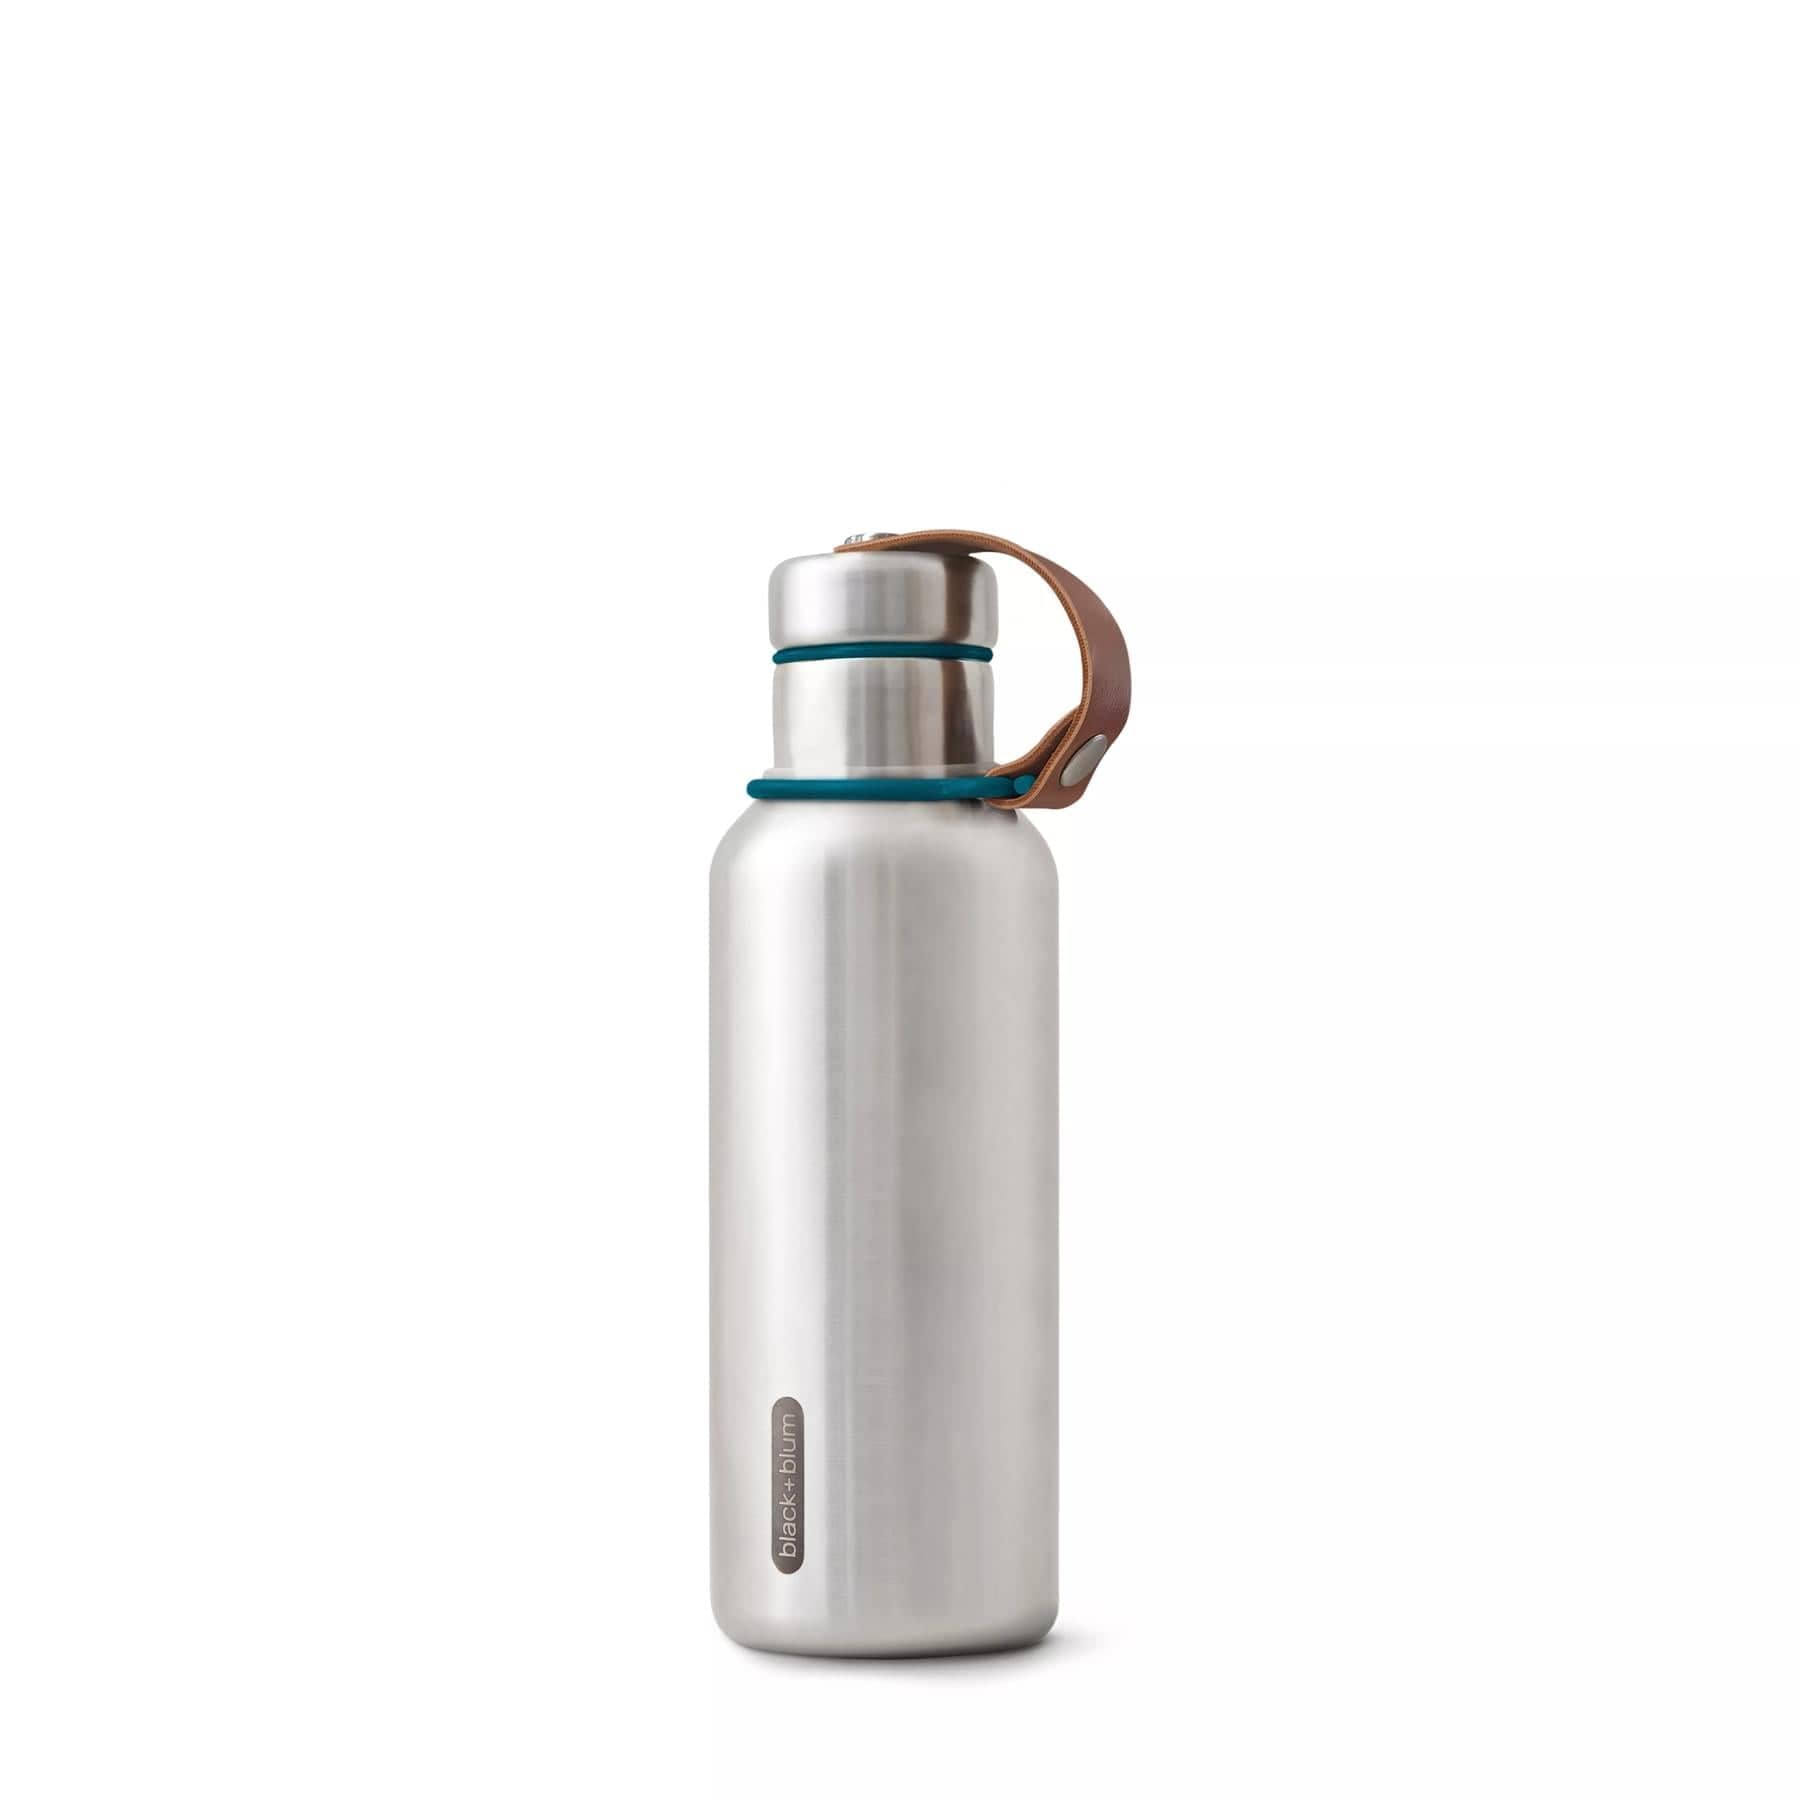 Stainless steel insulated water bottle with copper lid and carrying handle on white background